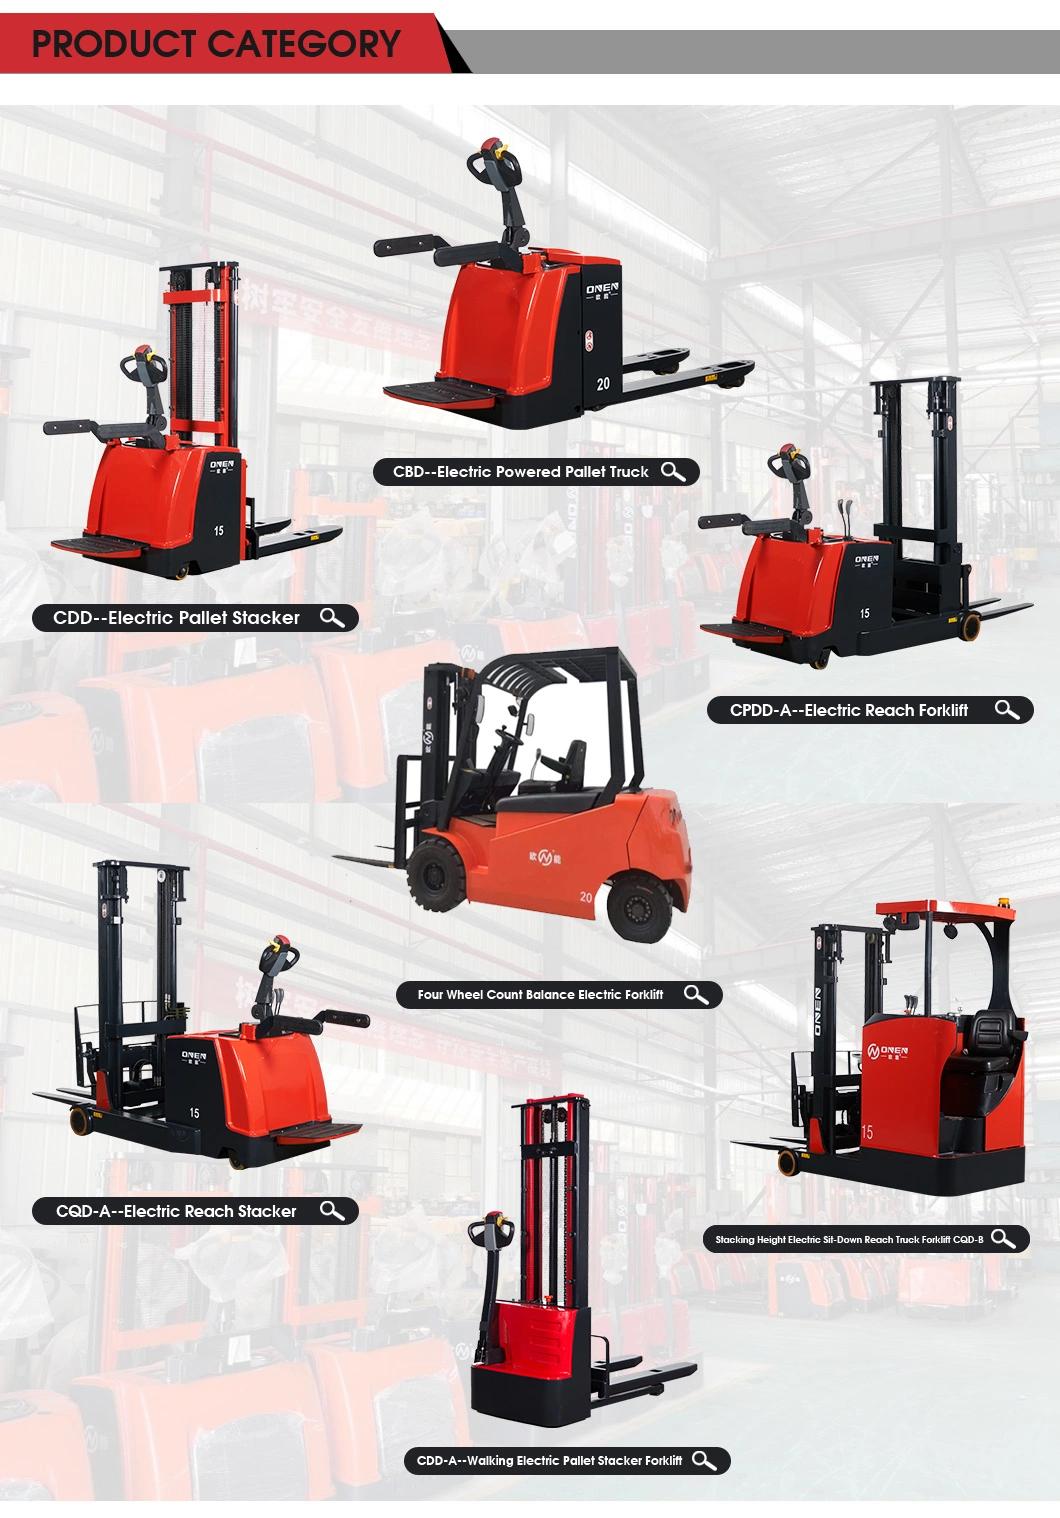 1t - 5t AC Motor Fork Lift Truck Electric Forklift